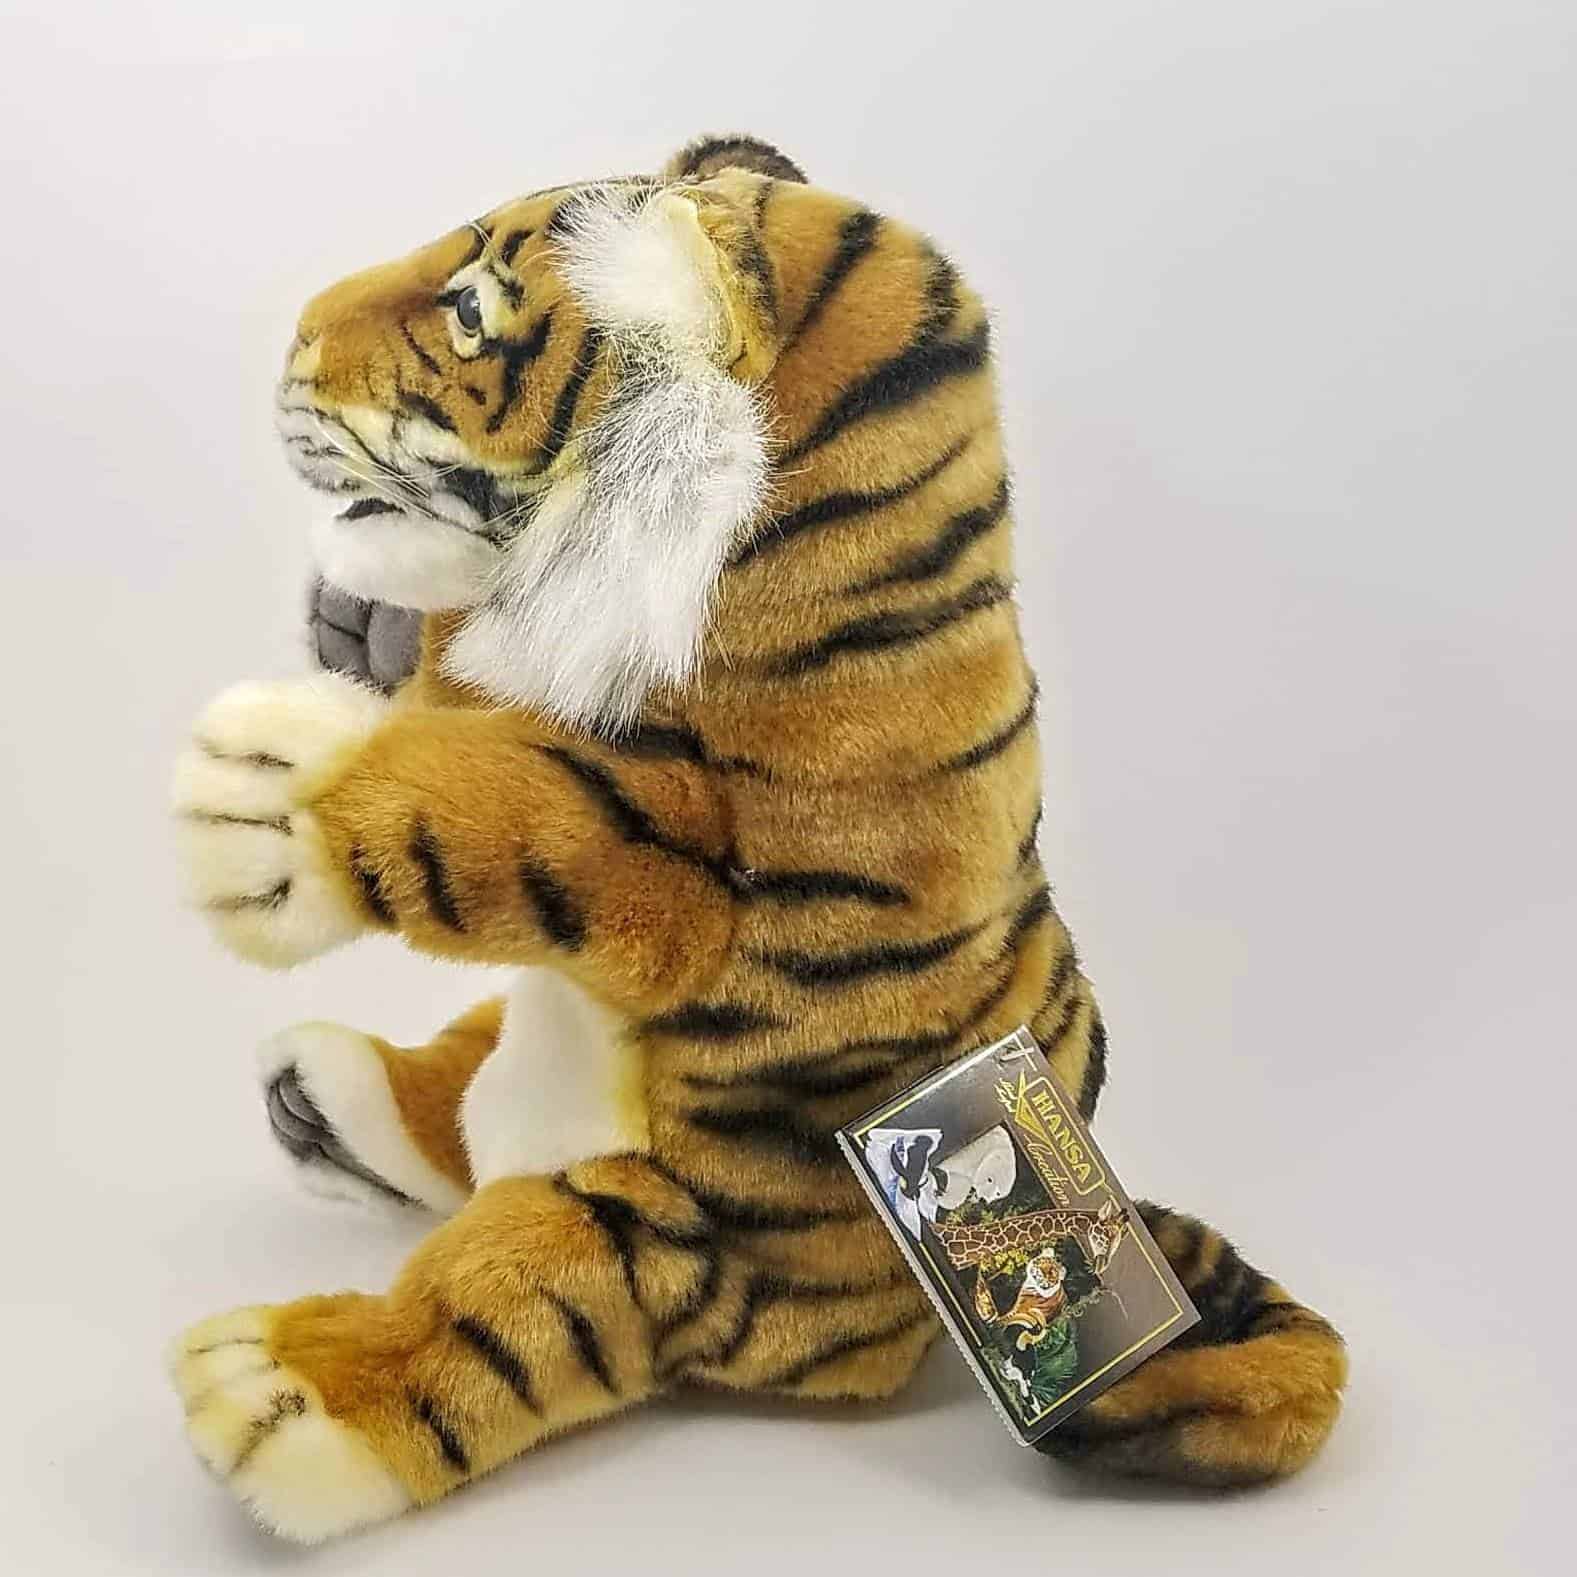 This Tiger Hand Puppet by Hansa True to Life Looking Soft Plush Animal Learning Toy is made with love by Premier Homegoods! Shop more unique gift ideas today with Spots Initiatives, the best way to support creators.